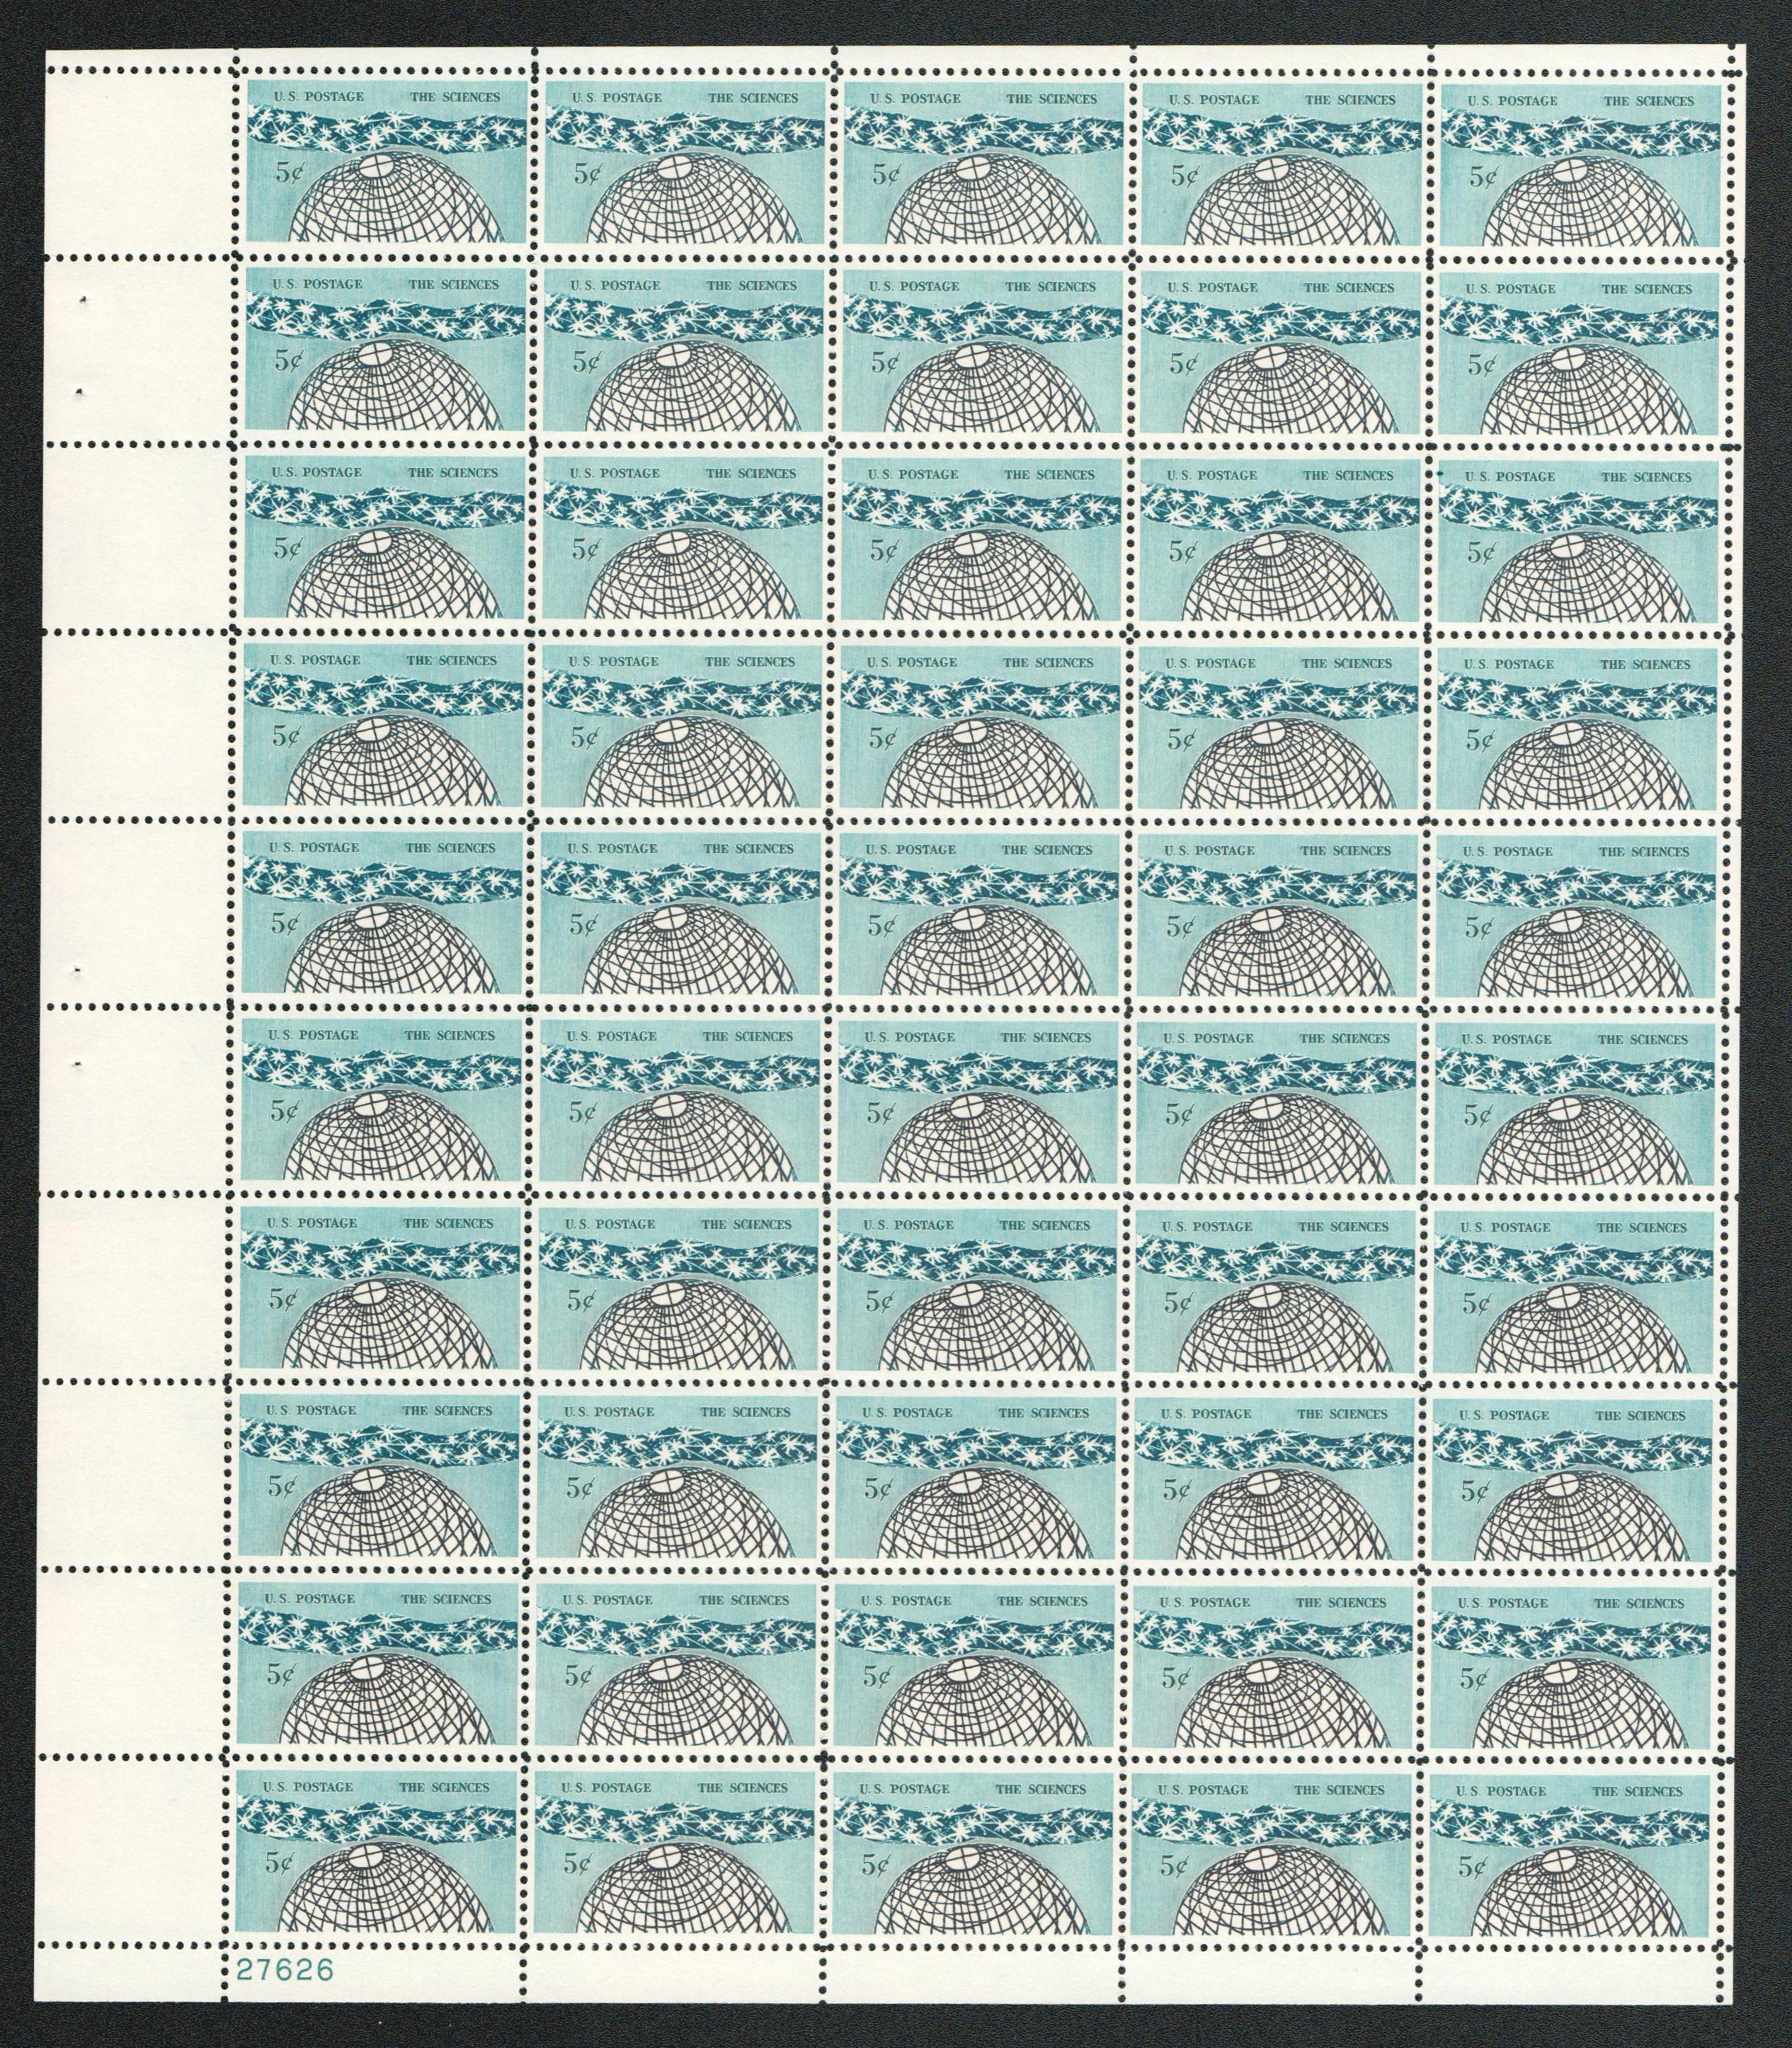 Postage Stamps For Crafting: 1963 5c 'The Sciences'; Blue; 50